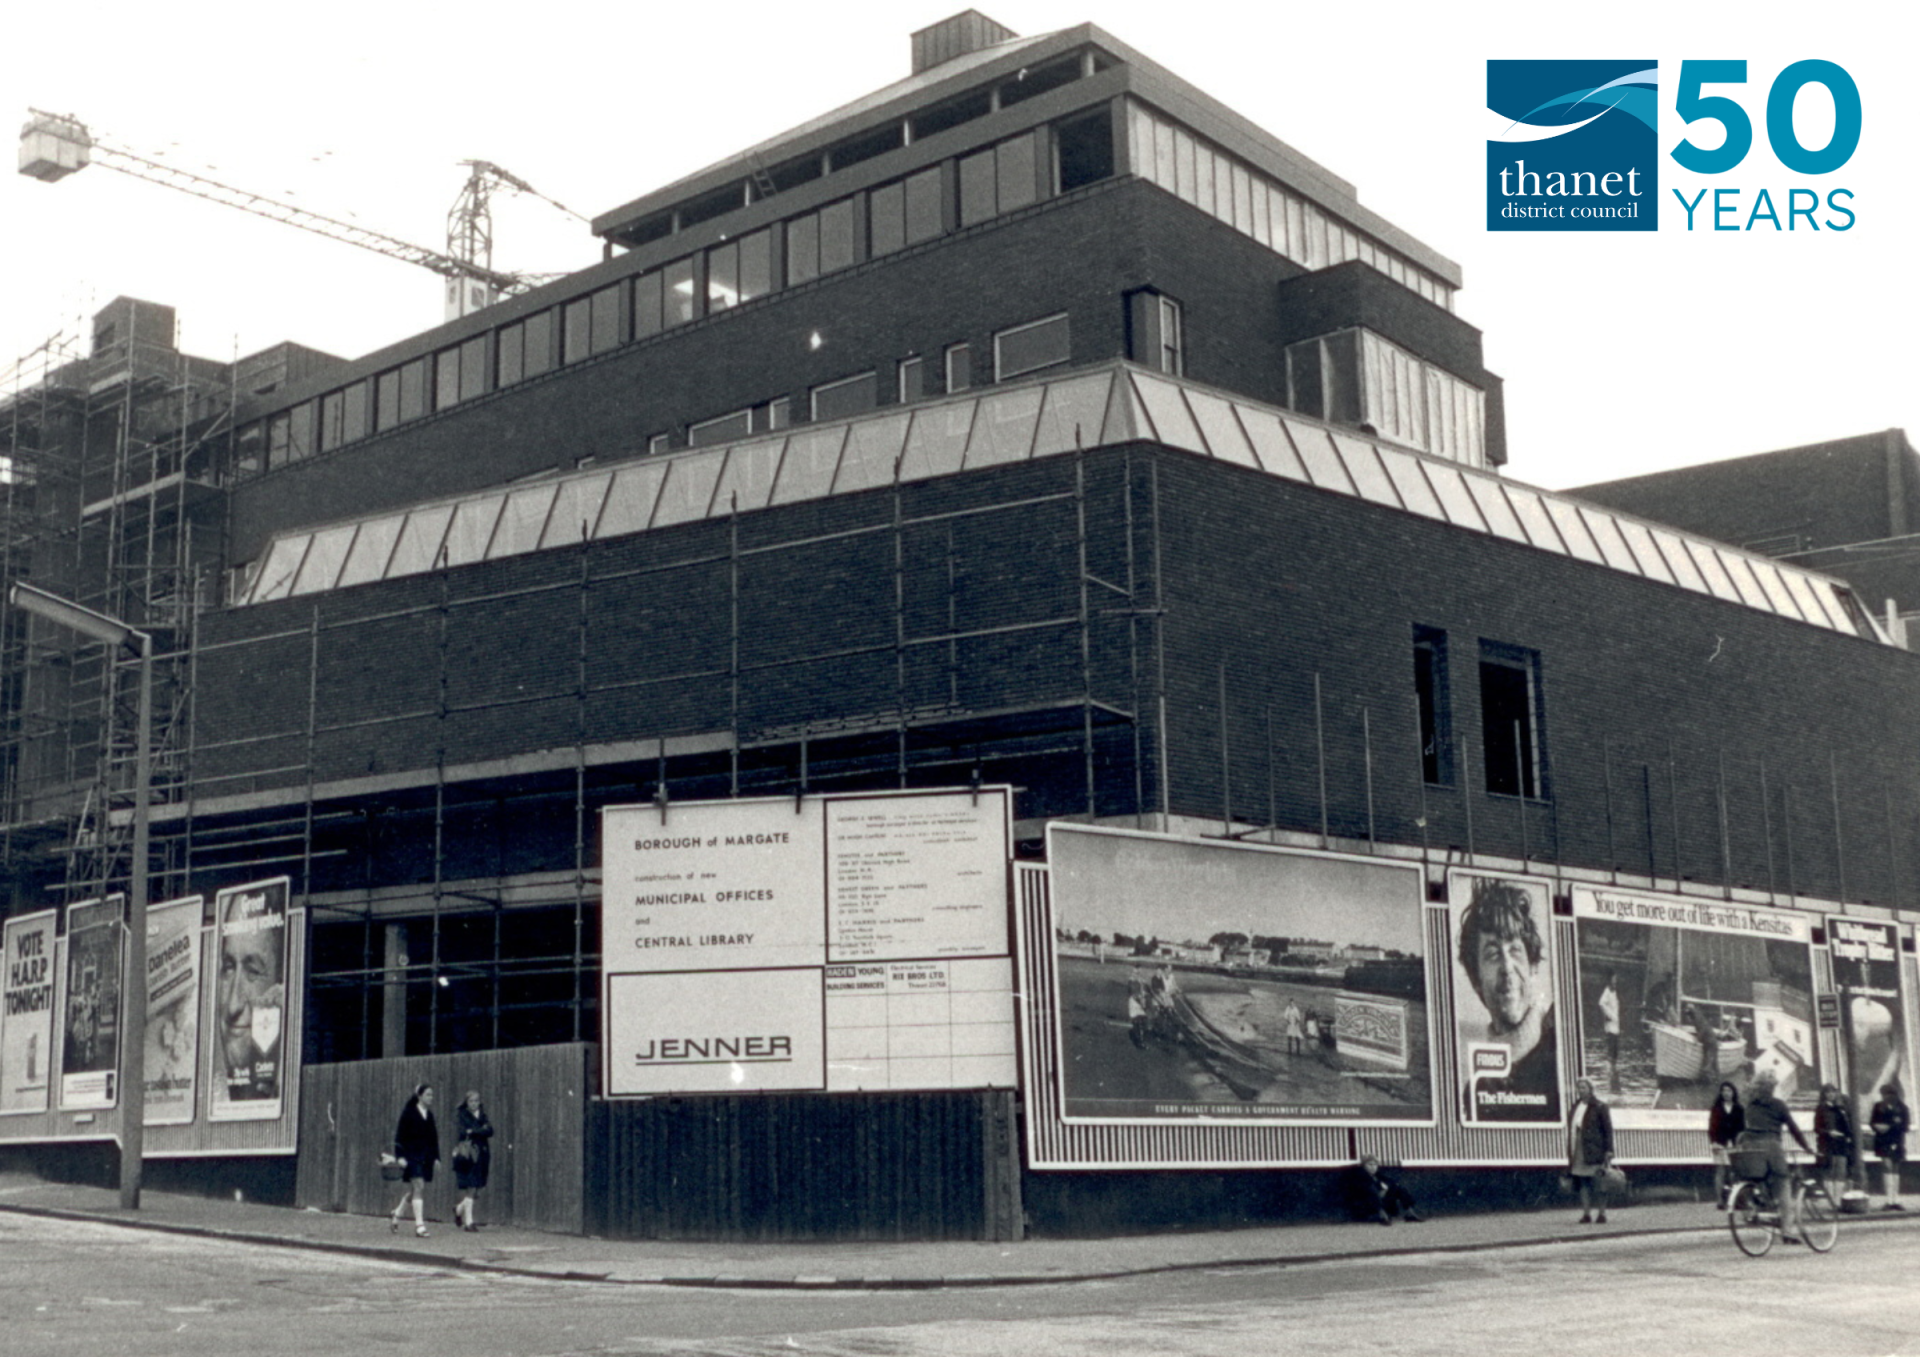 an old image of the Thanet Gateway building on Cecil Square under construction, with a special edition of the council's logo to commemorate the council's 50th anniversary